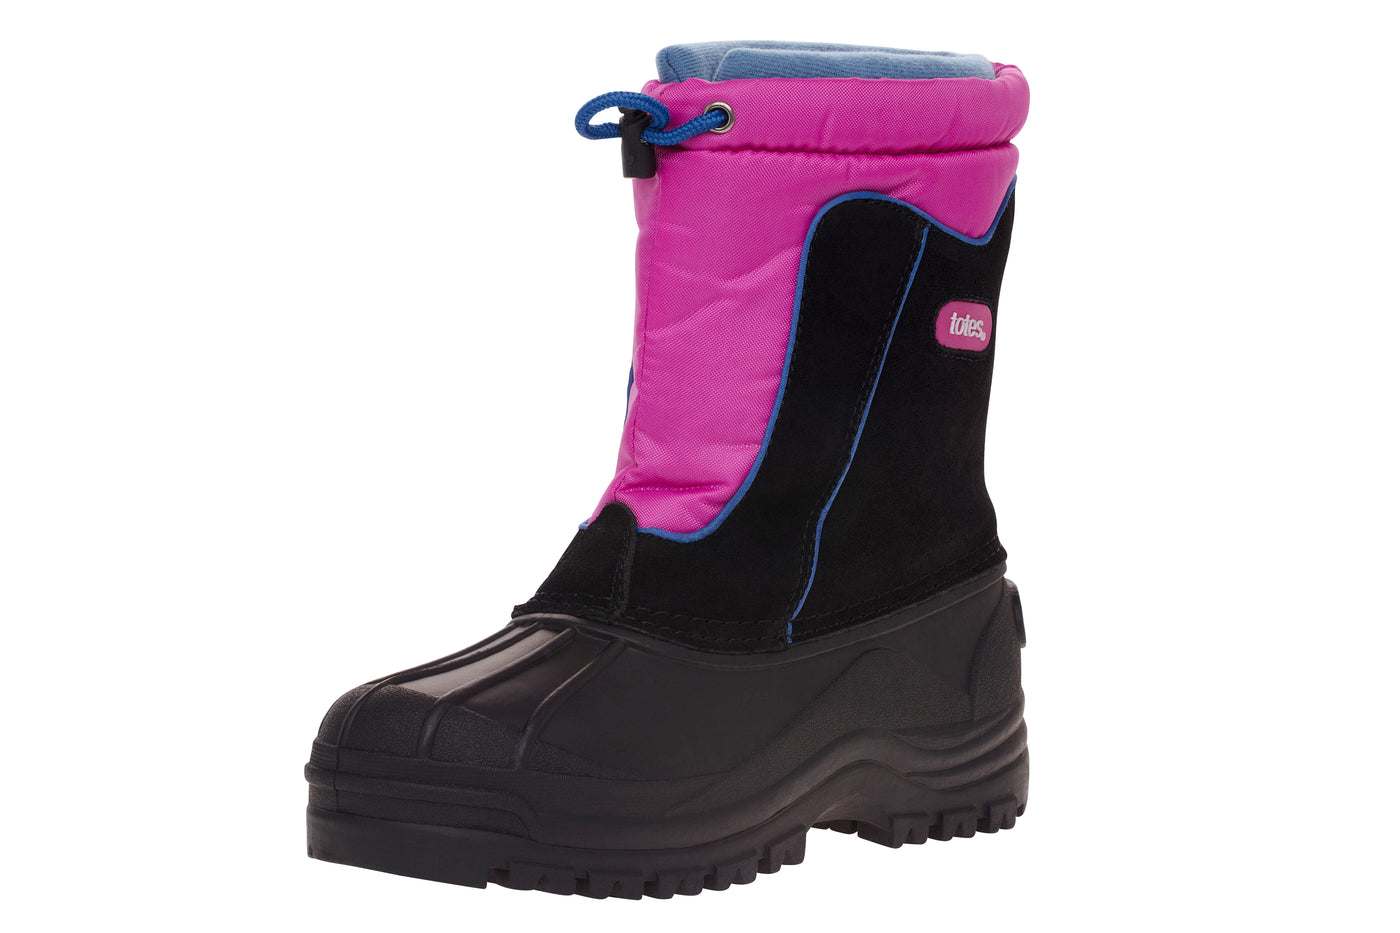 totes Kids Snow Boots with Toggle Bungee Closure Action All-Weather Insulated Winter Boots Built for Comfort, Durability - Keeps Feet Warm & Dry